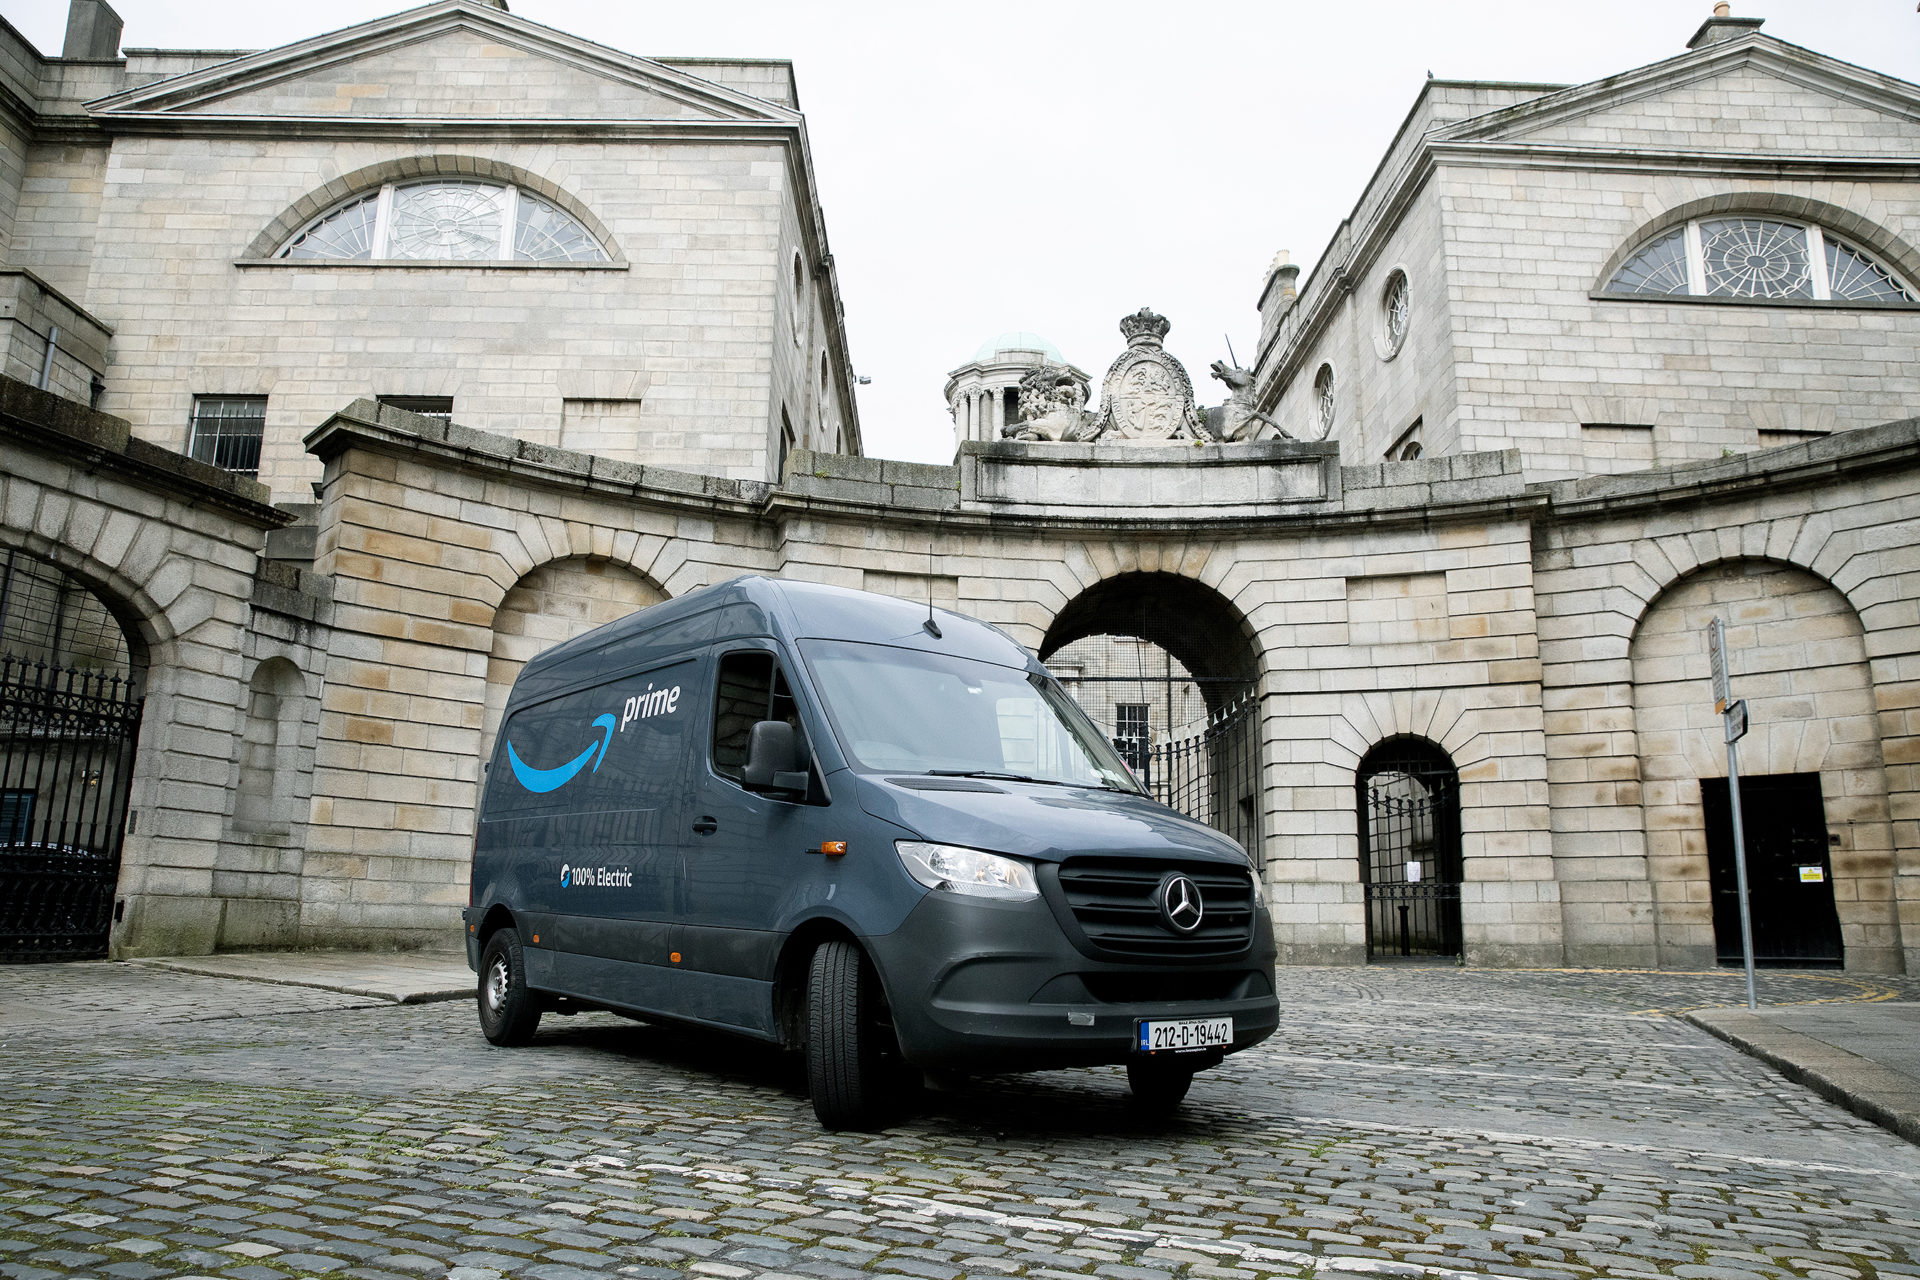 An Amazon delivery van in Havelock Square in Dublin.